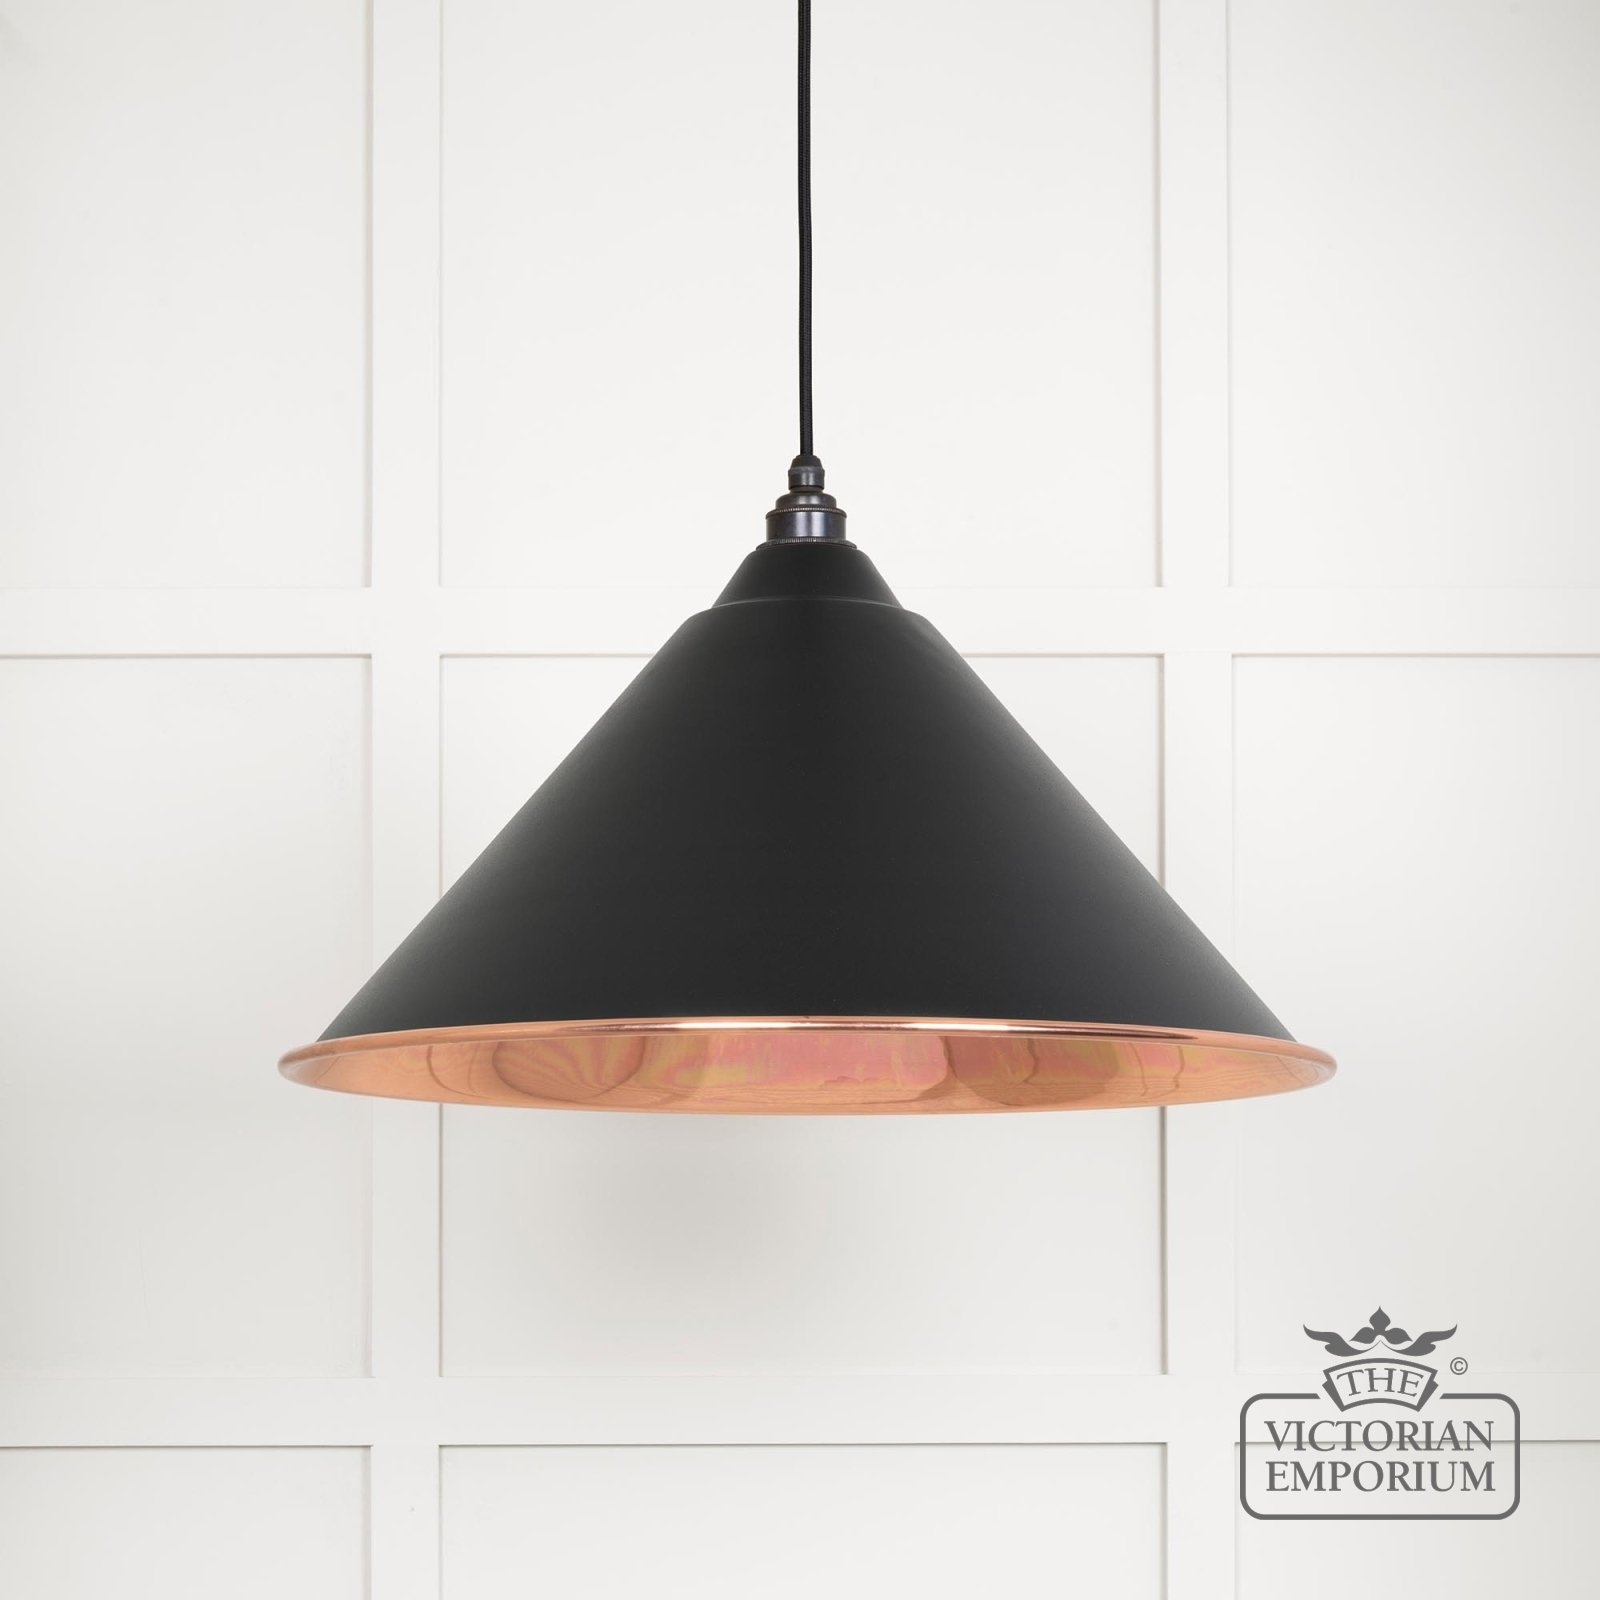 Hockliffe pendant light in Black and smooth copper